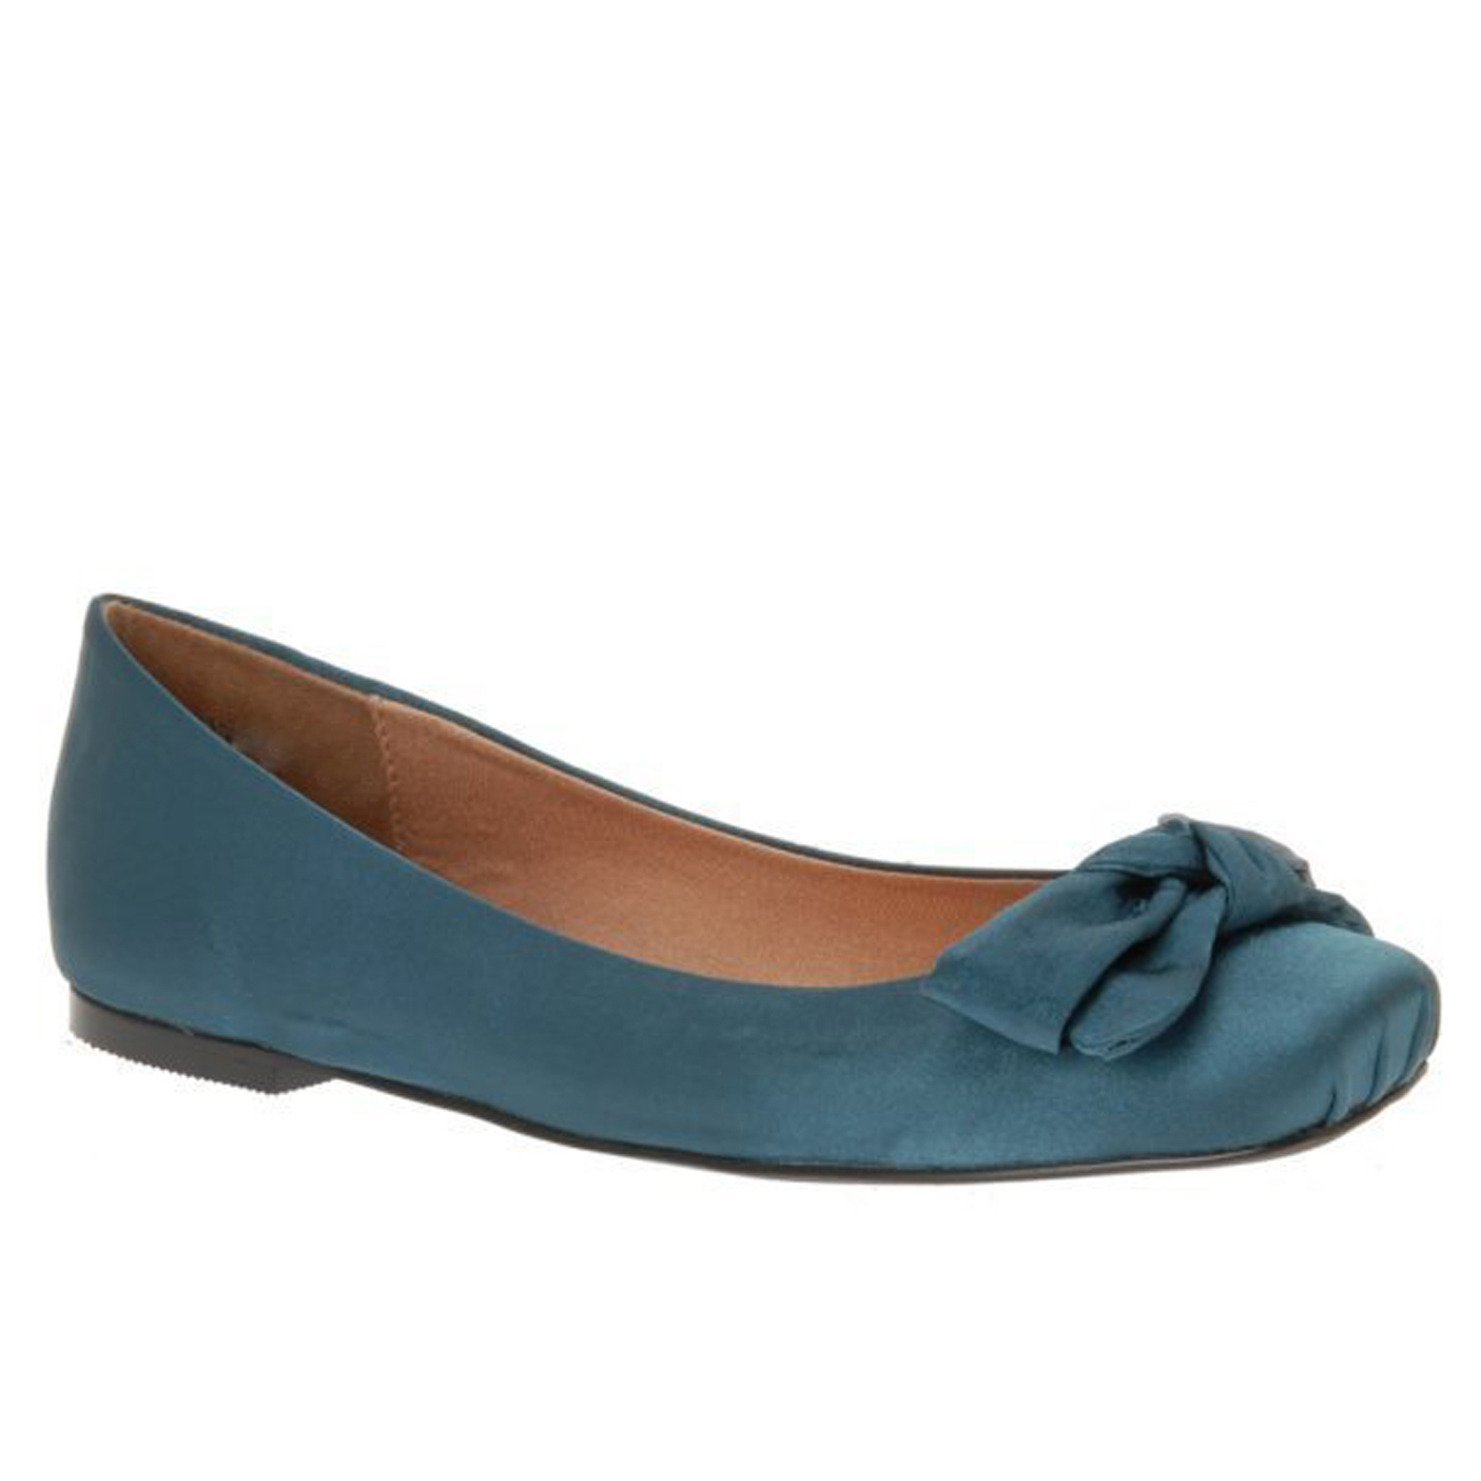 teal shoes for women